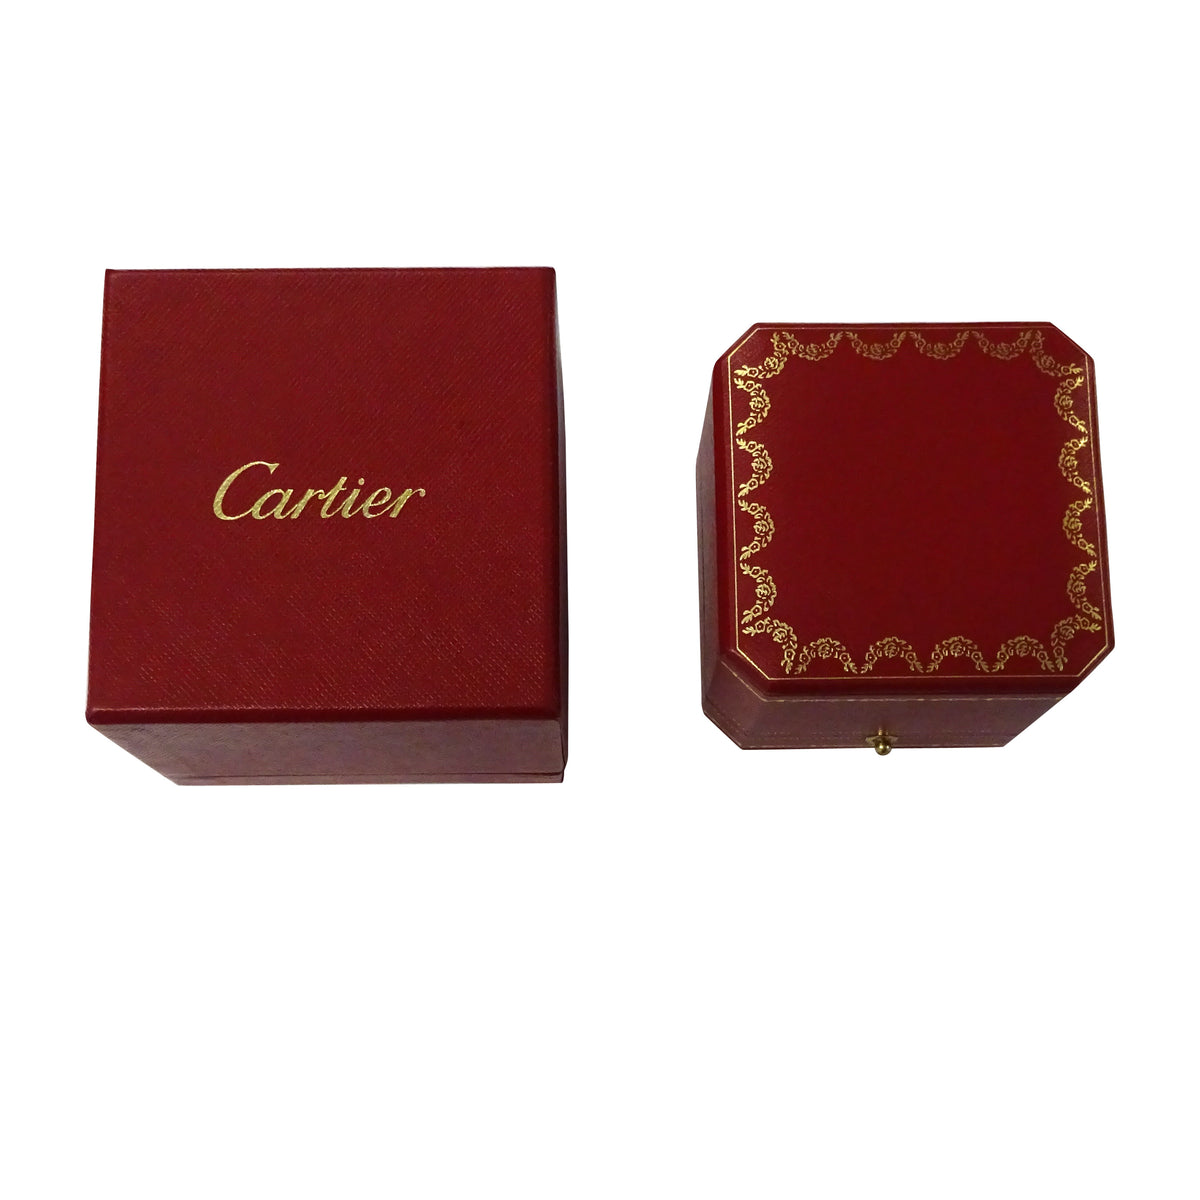 Cartier Micro Pave 2.3mm Diamond Band in 18K Rose Gold 0.15 CTW